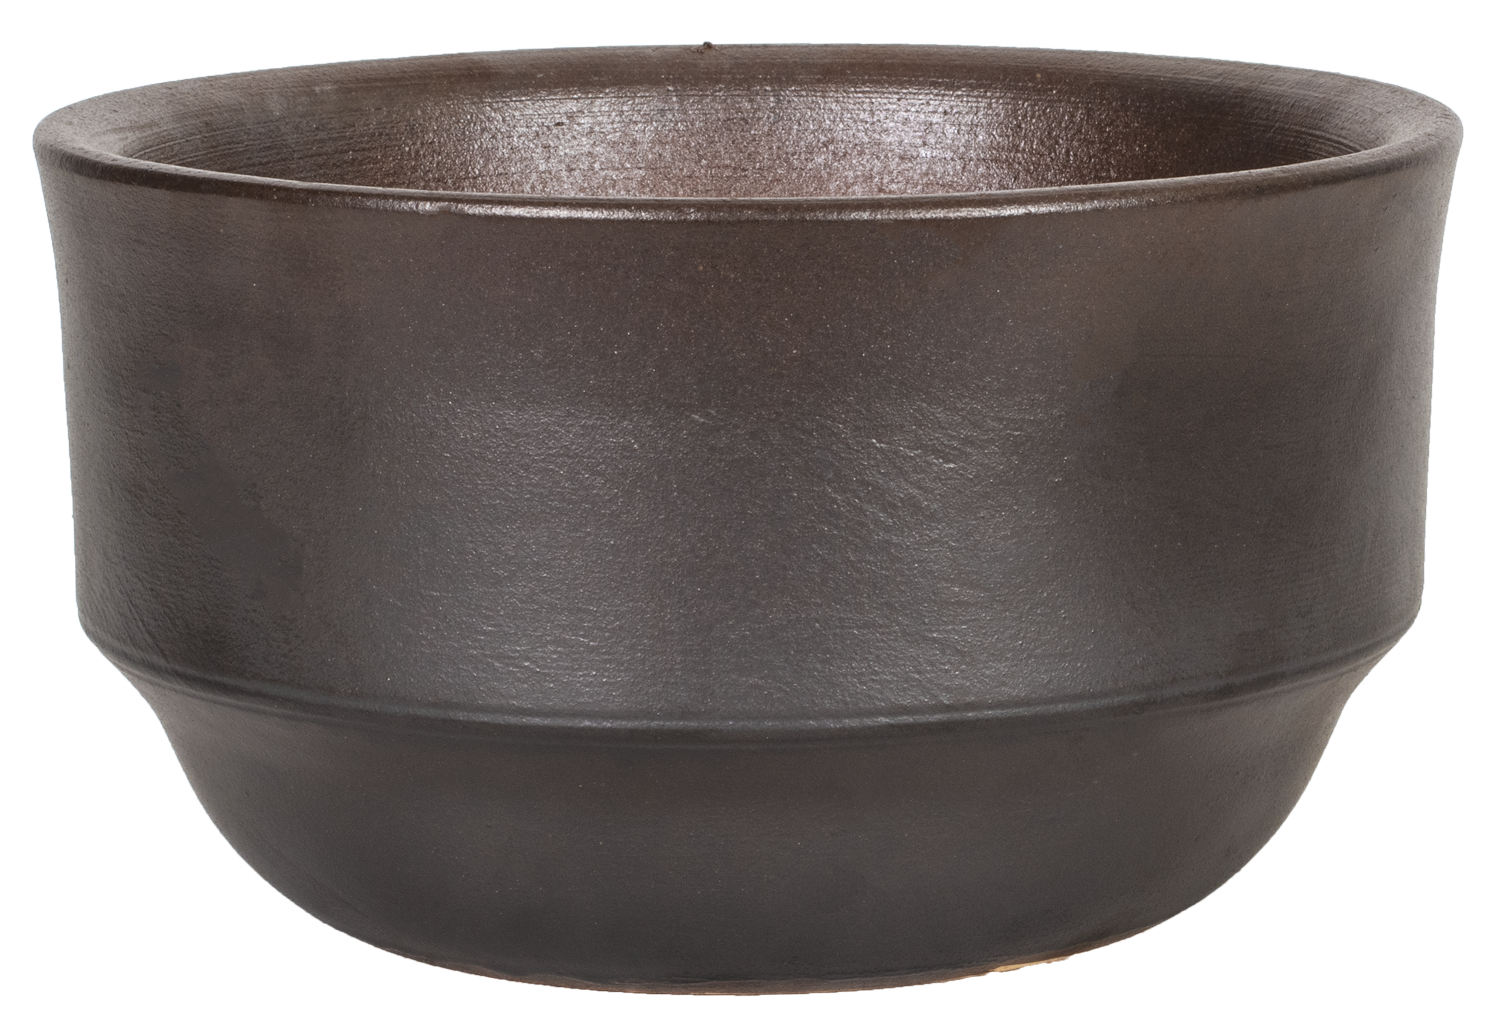 Medium rounded bowl planter in brown glaze